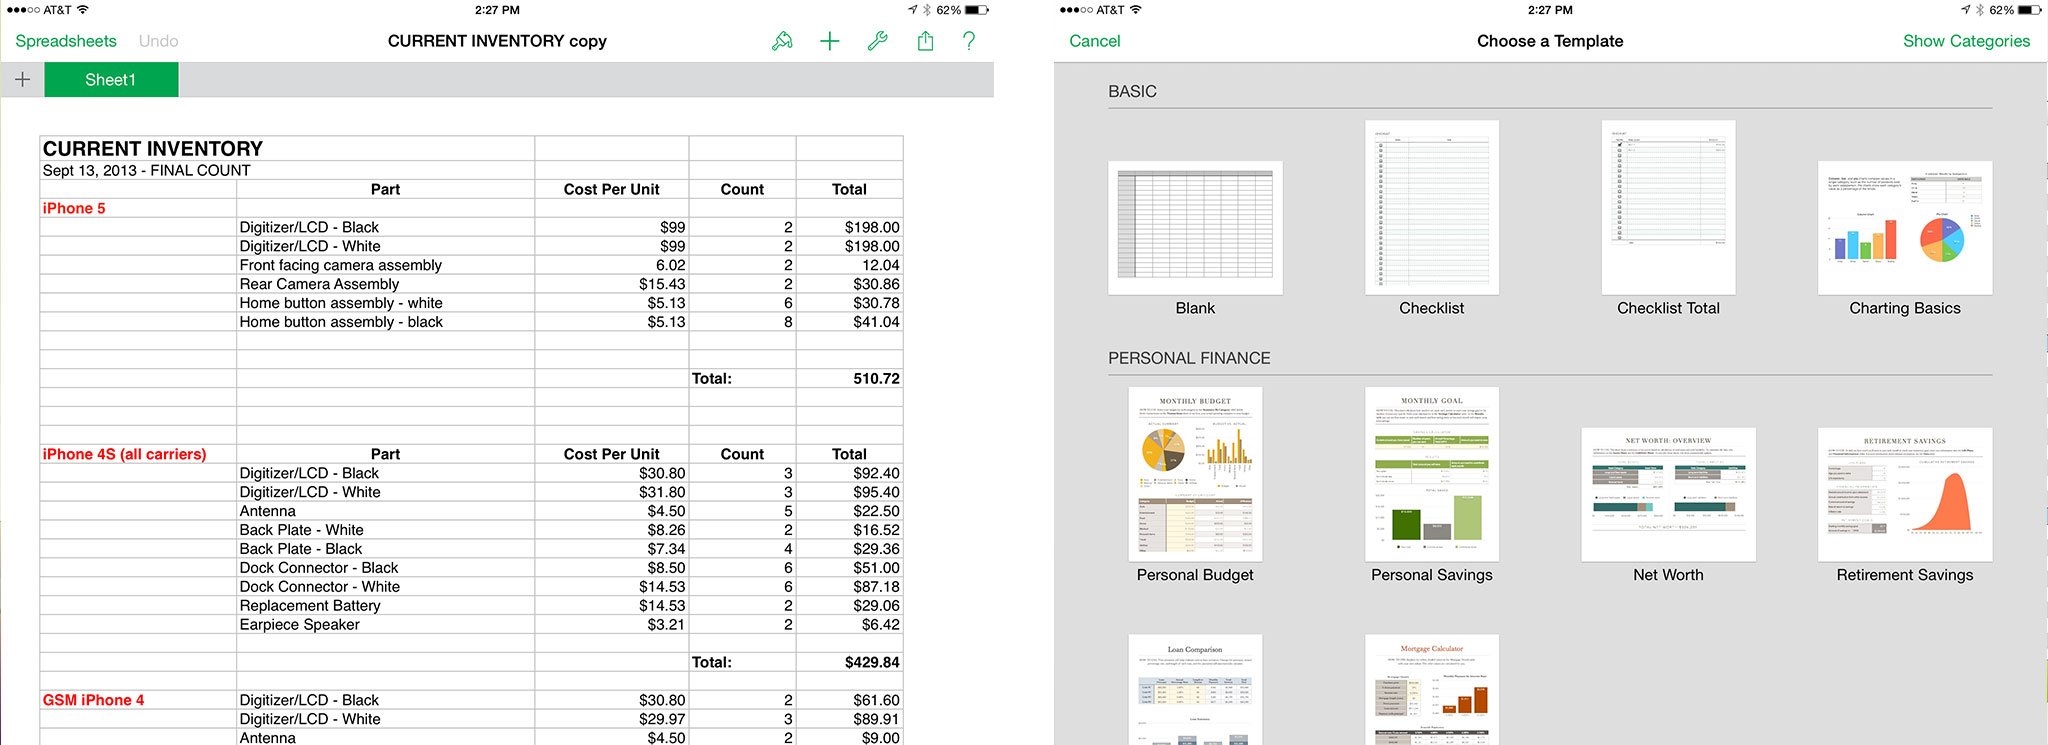 Best spreadsheet apps for iPad: Numbers